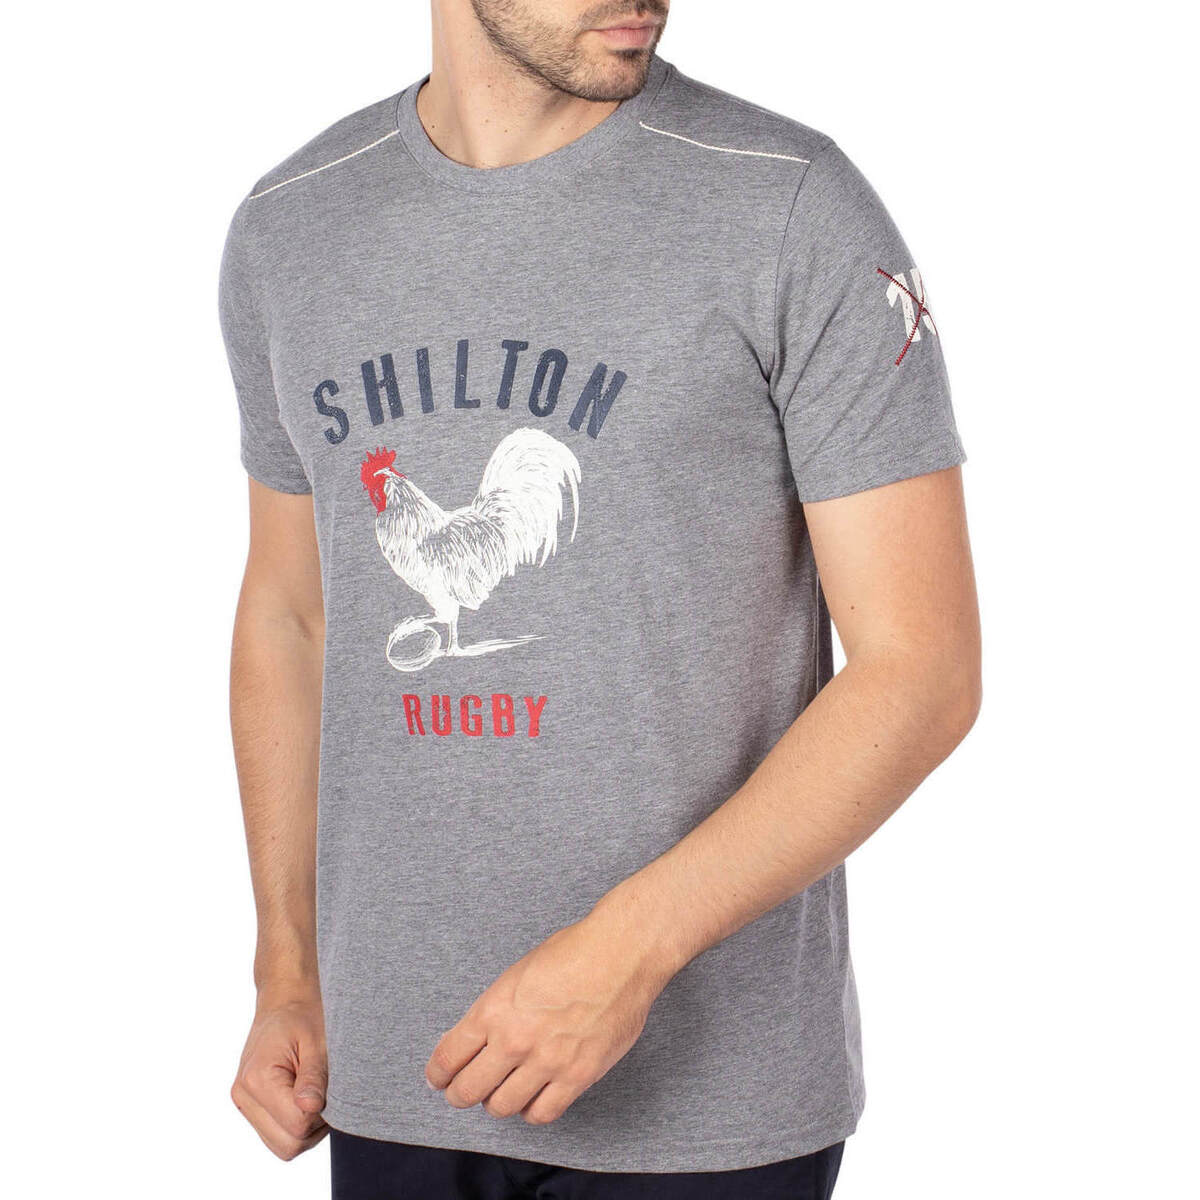 Vêtements Homme Canterbury Ospreys T Shirt 2019 T-shirt rugby french rooster 